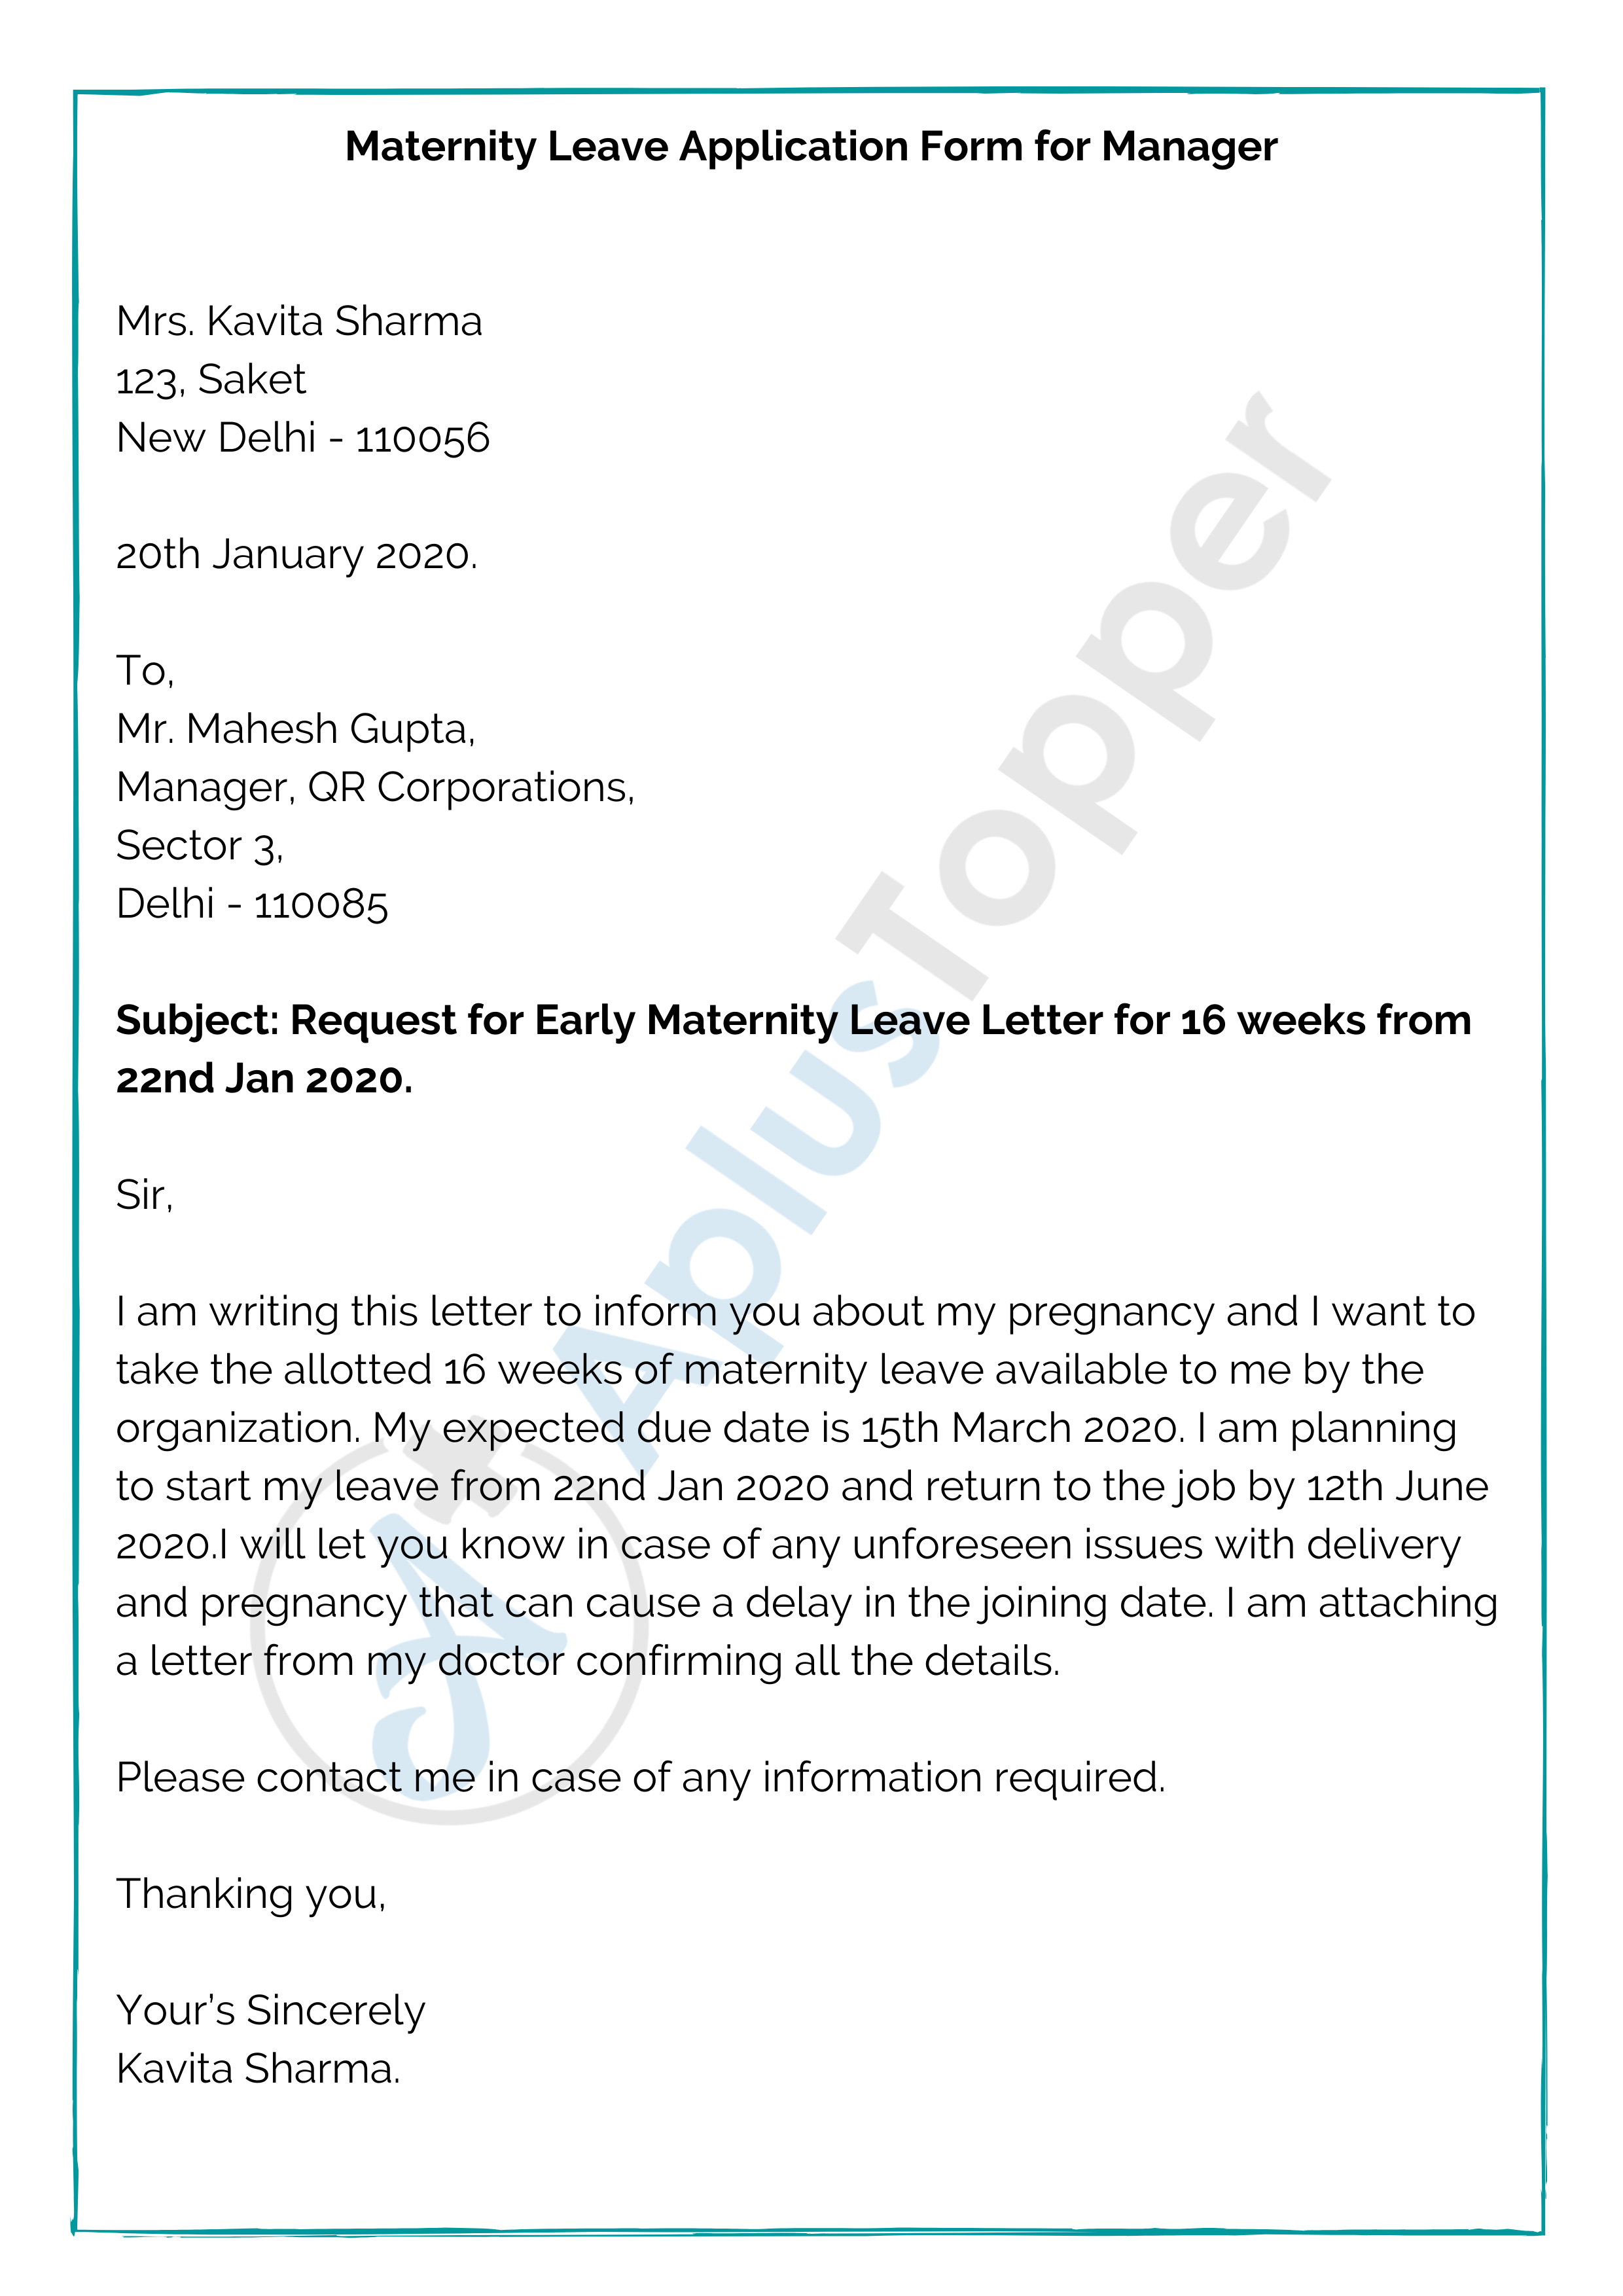 Maternity Leave Application Form for Manager